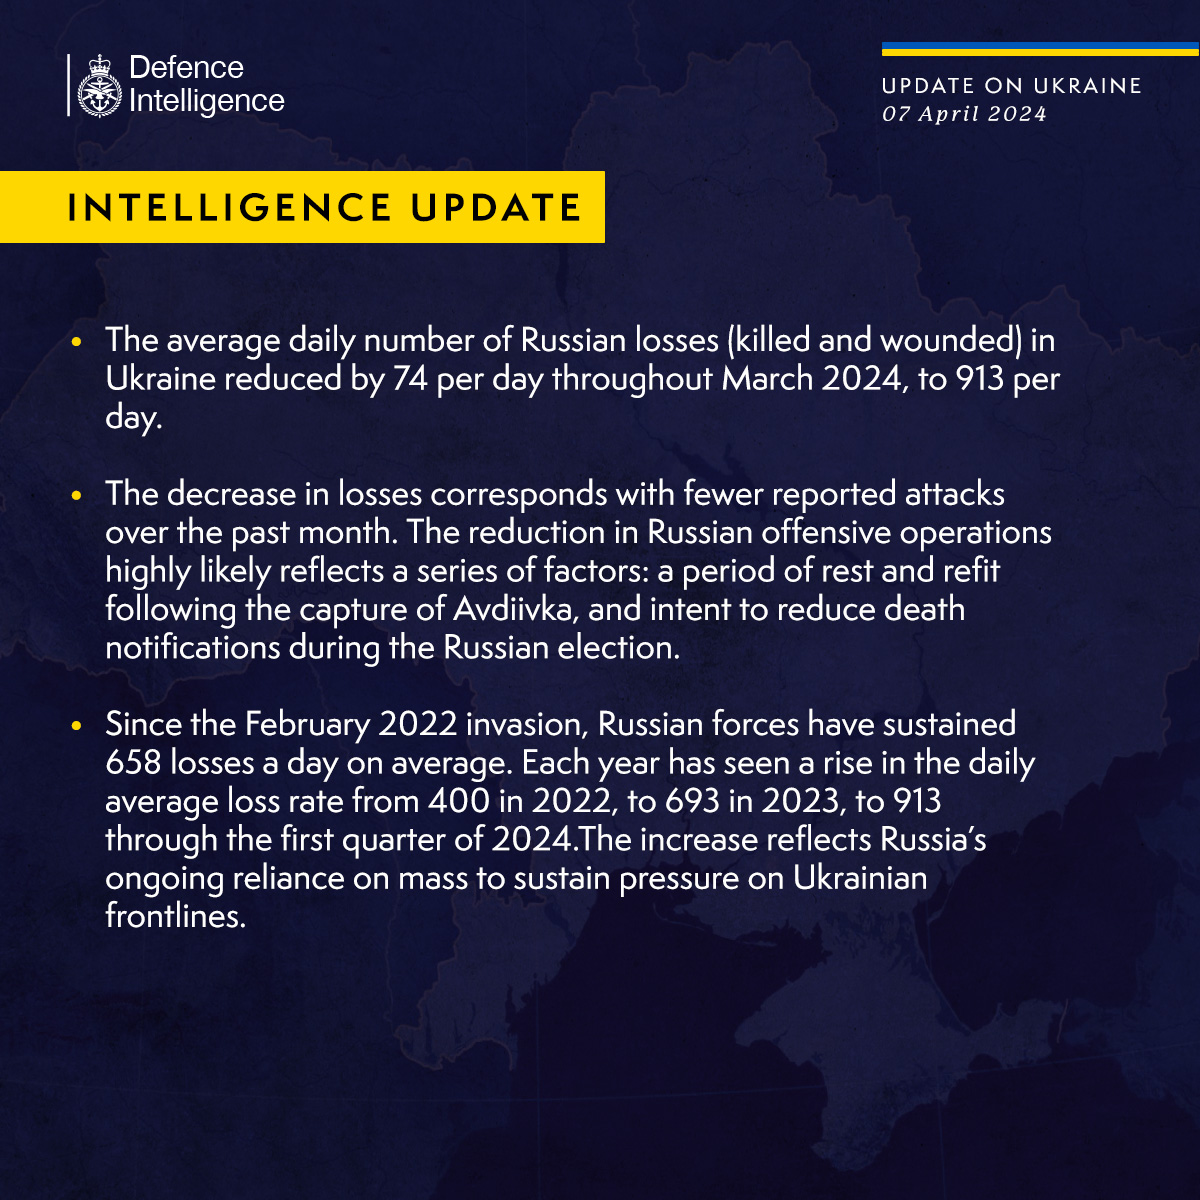 Latest Defence Intelligence update on the situation in Ukraine – 07 April 2024. Find out more about Defence Intelligence's use of language: ow.ly/q8ek50R9W30 #StandWithUkraine 🇺🇦